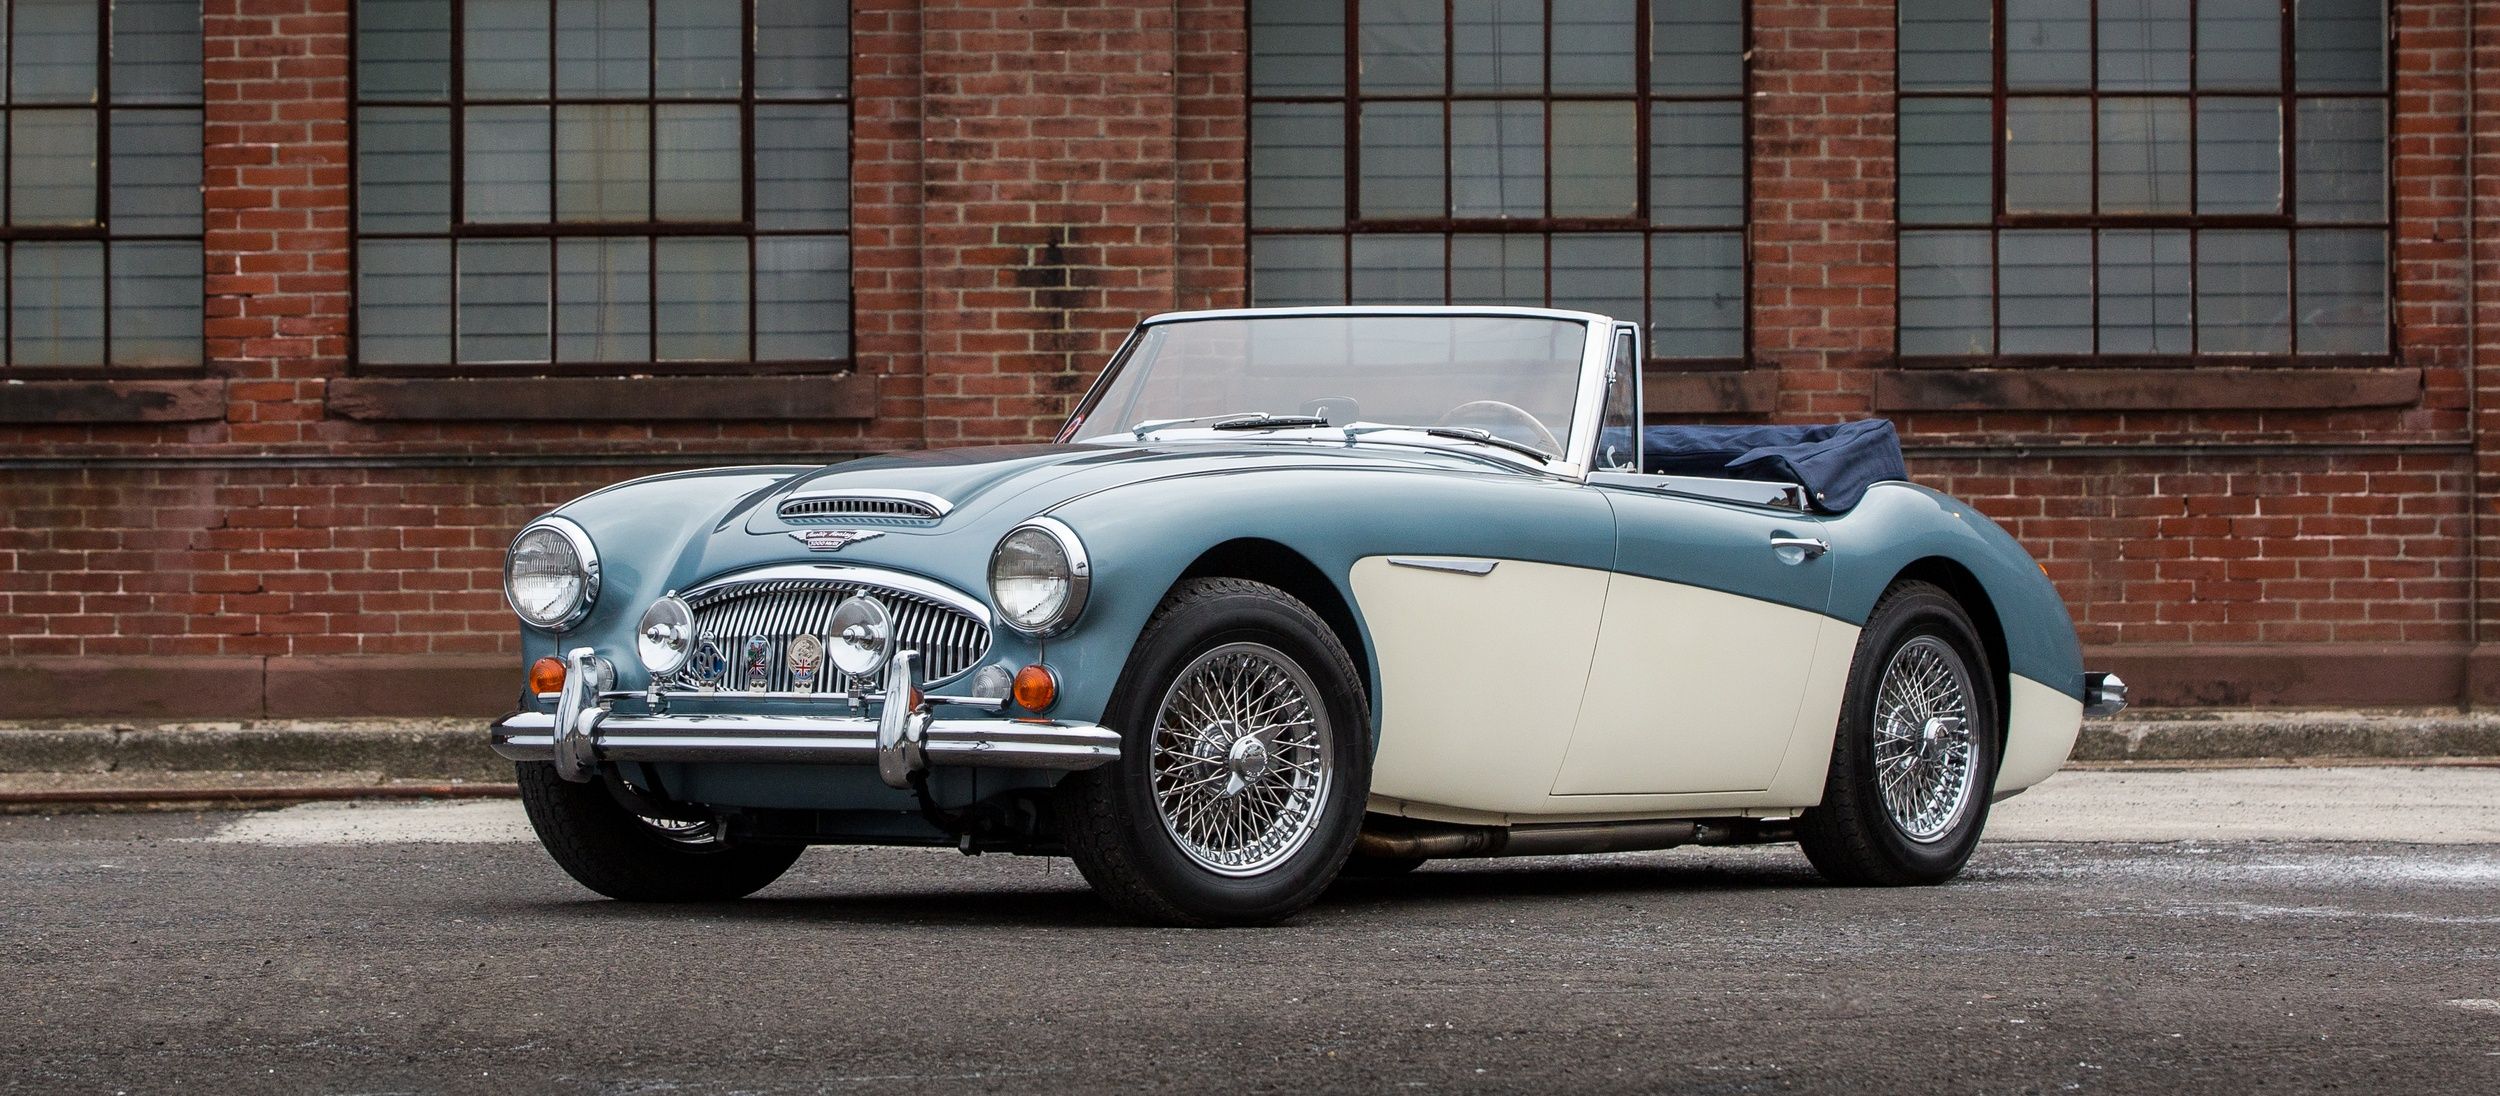 Austin-Healey 3000 parked outside